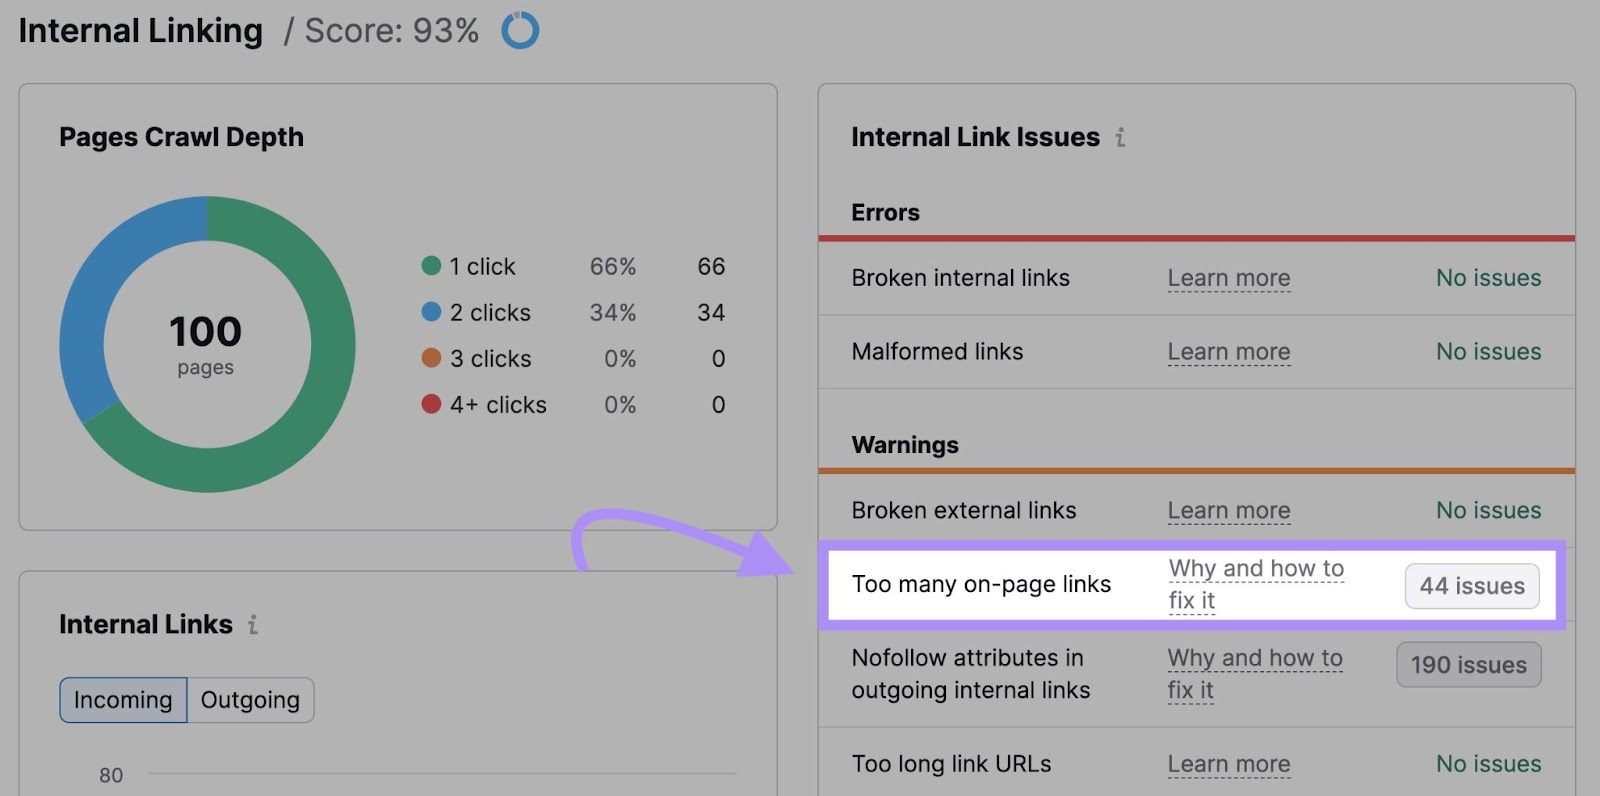 "Too galore  on-page links" effect   highlighted nether  "Internal Linking" report